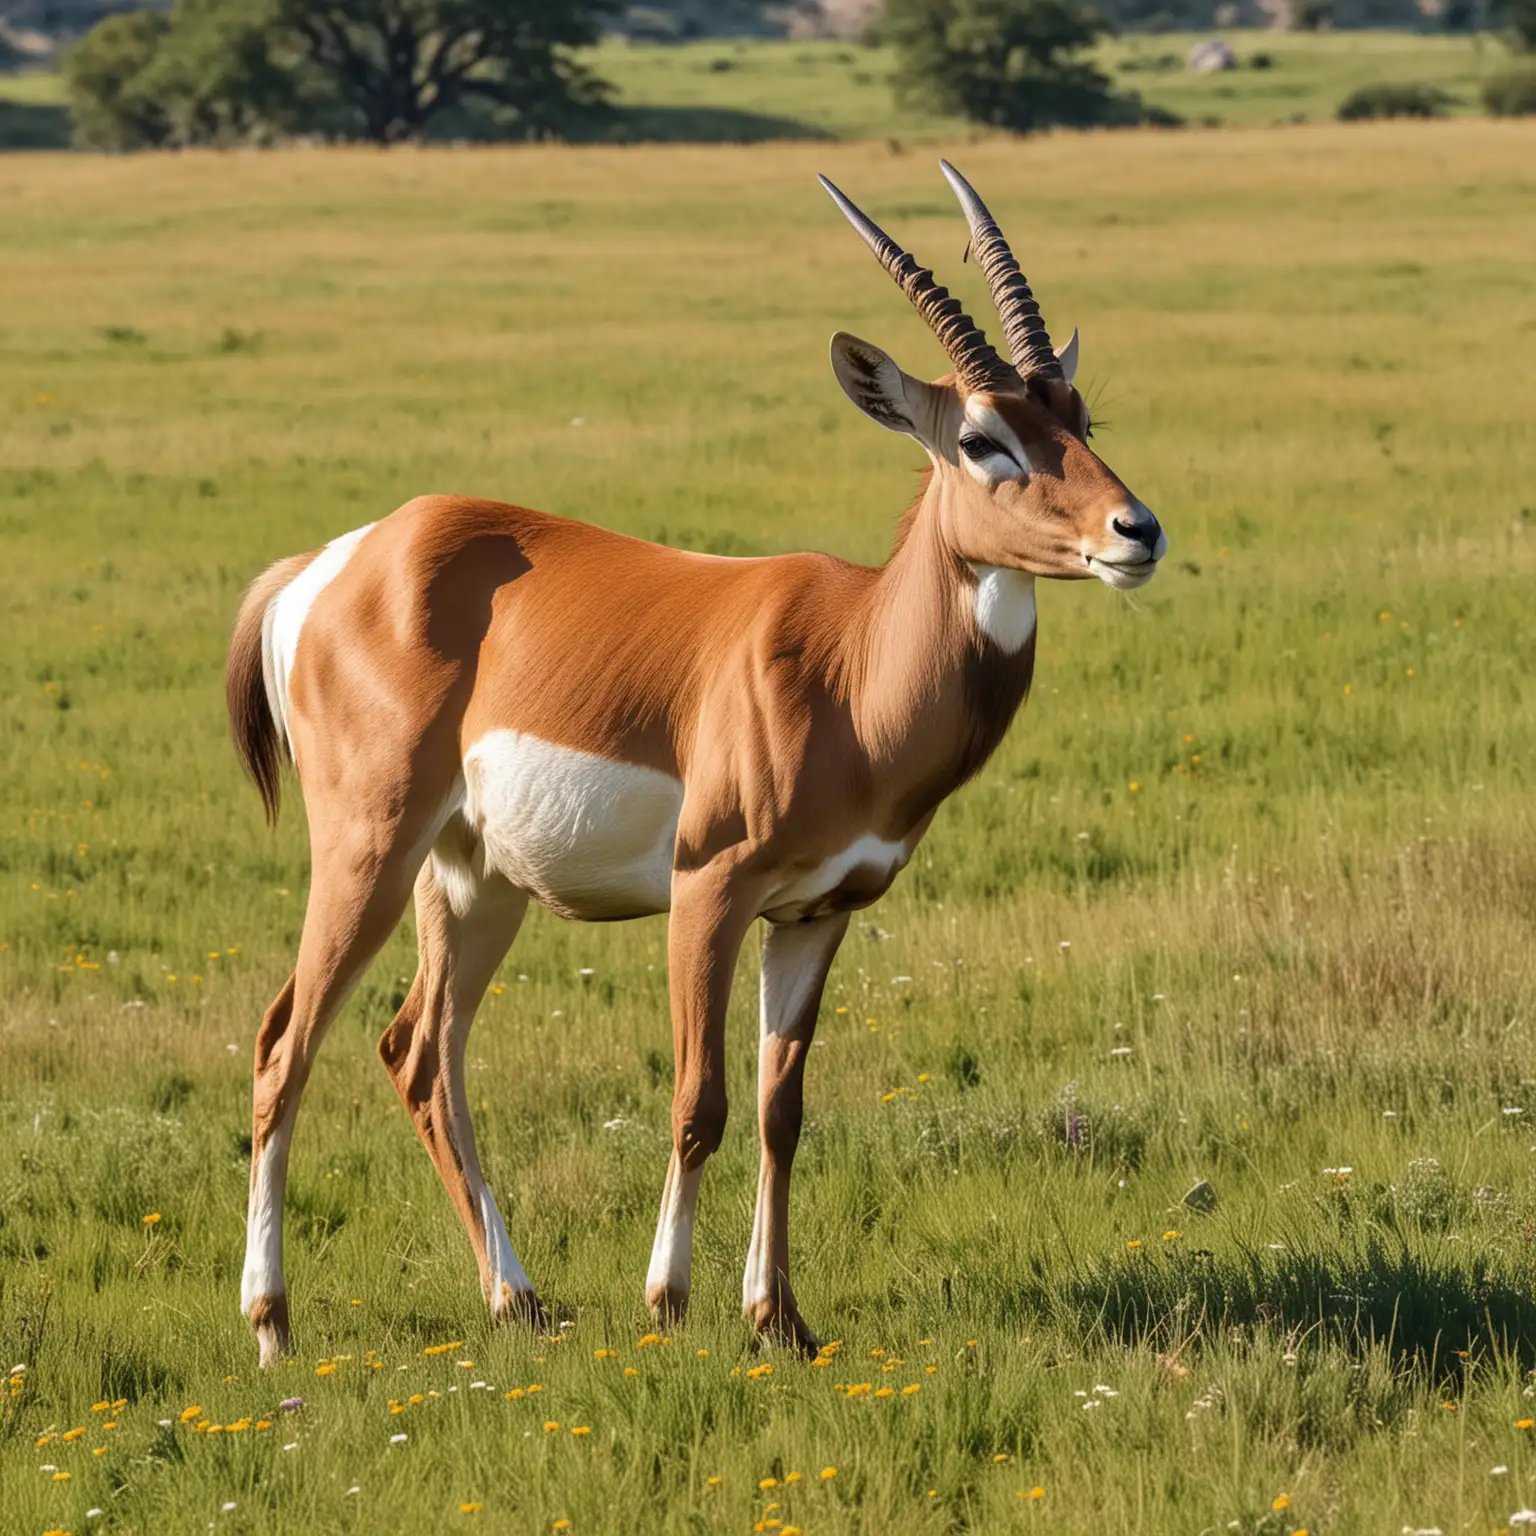 A majestic Antelope grazing peacefully in a meadow.